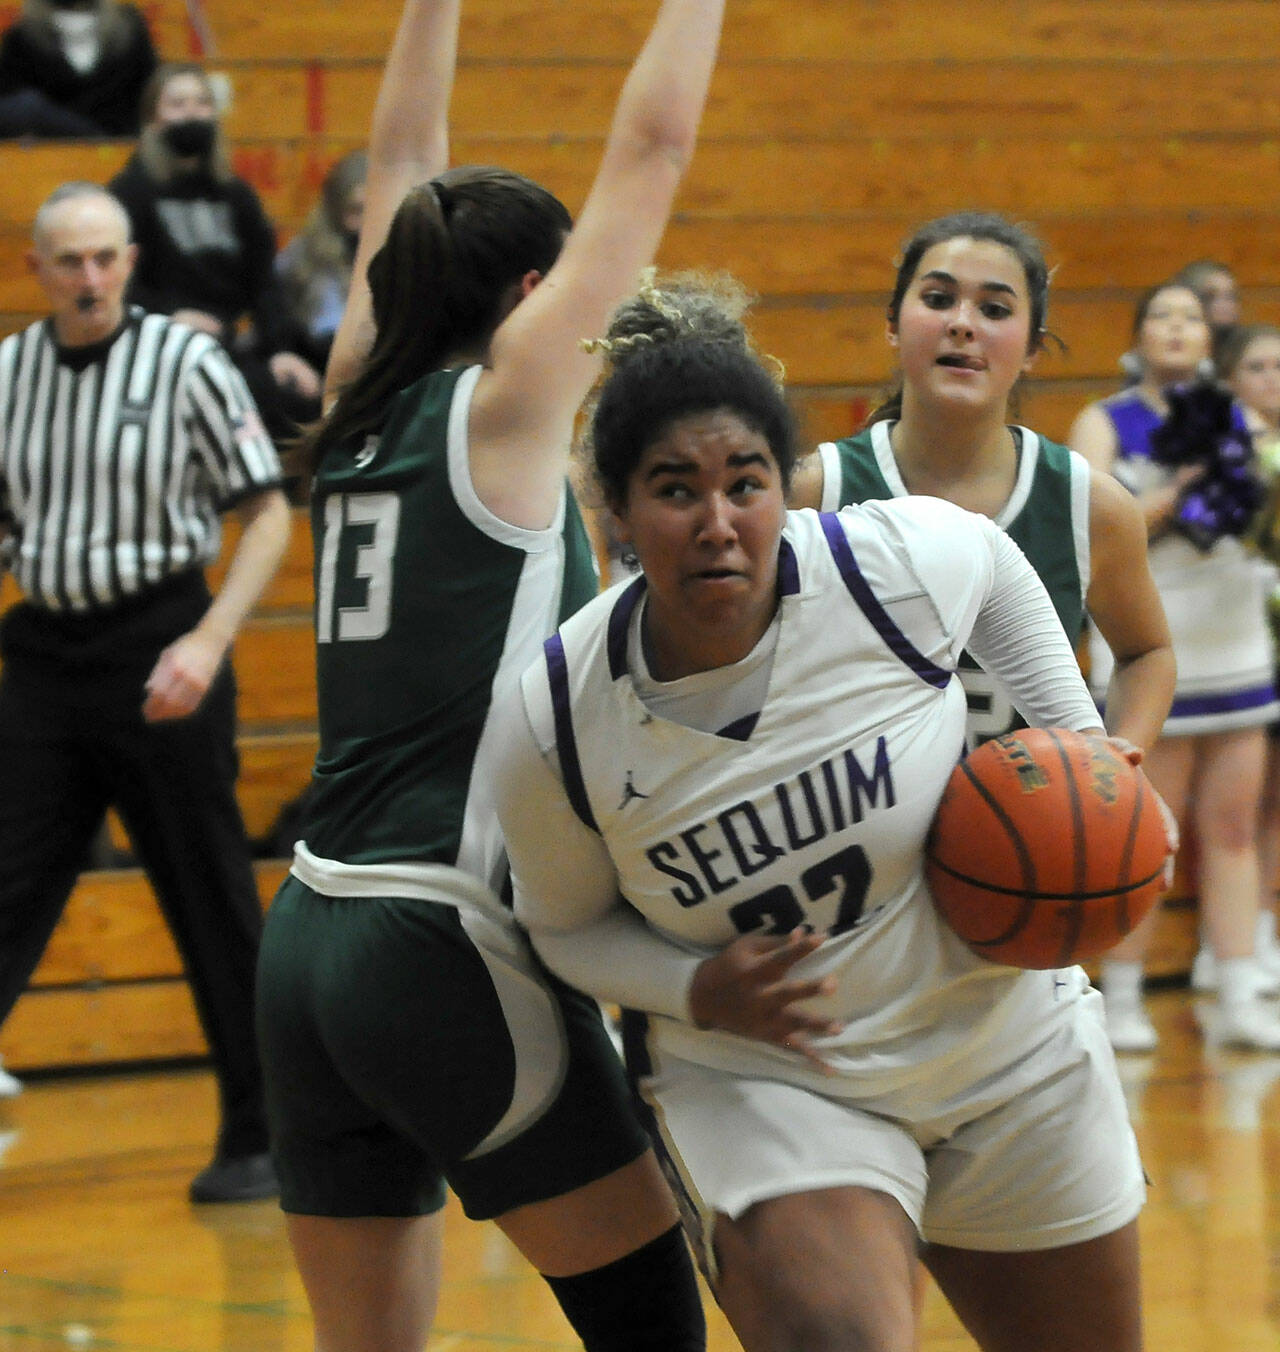 Sequim’s Jelissa Julmist, right, drives past Port Angeles’ Bailee Larson in the second half of Sequim’s 60-55 win over the Roughriders on Jan. 11. Sequim Gazette photo by Michael Dashiell